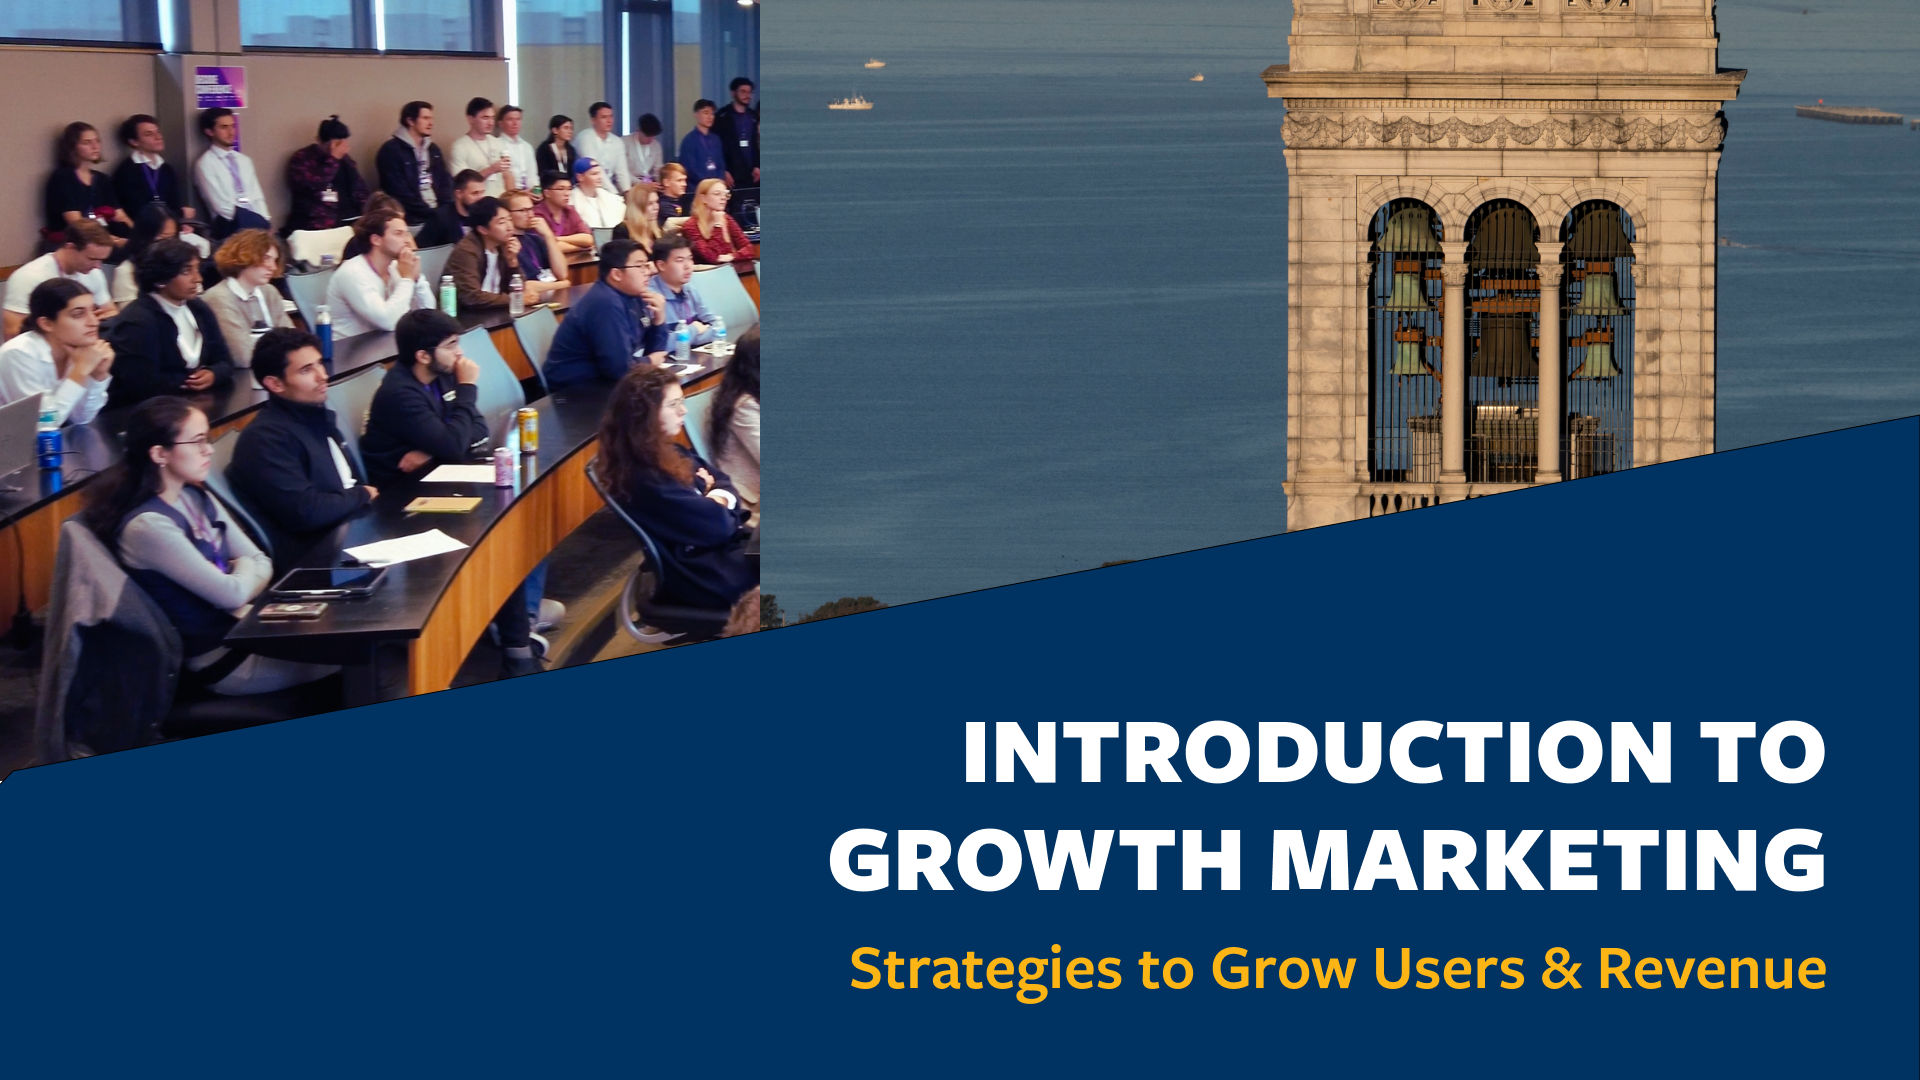 UC Berkeley SCET Introduction to Growth Marketing course for professionals, marketers, startup founds, investors, students, and the public.